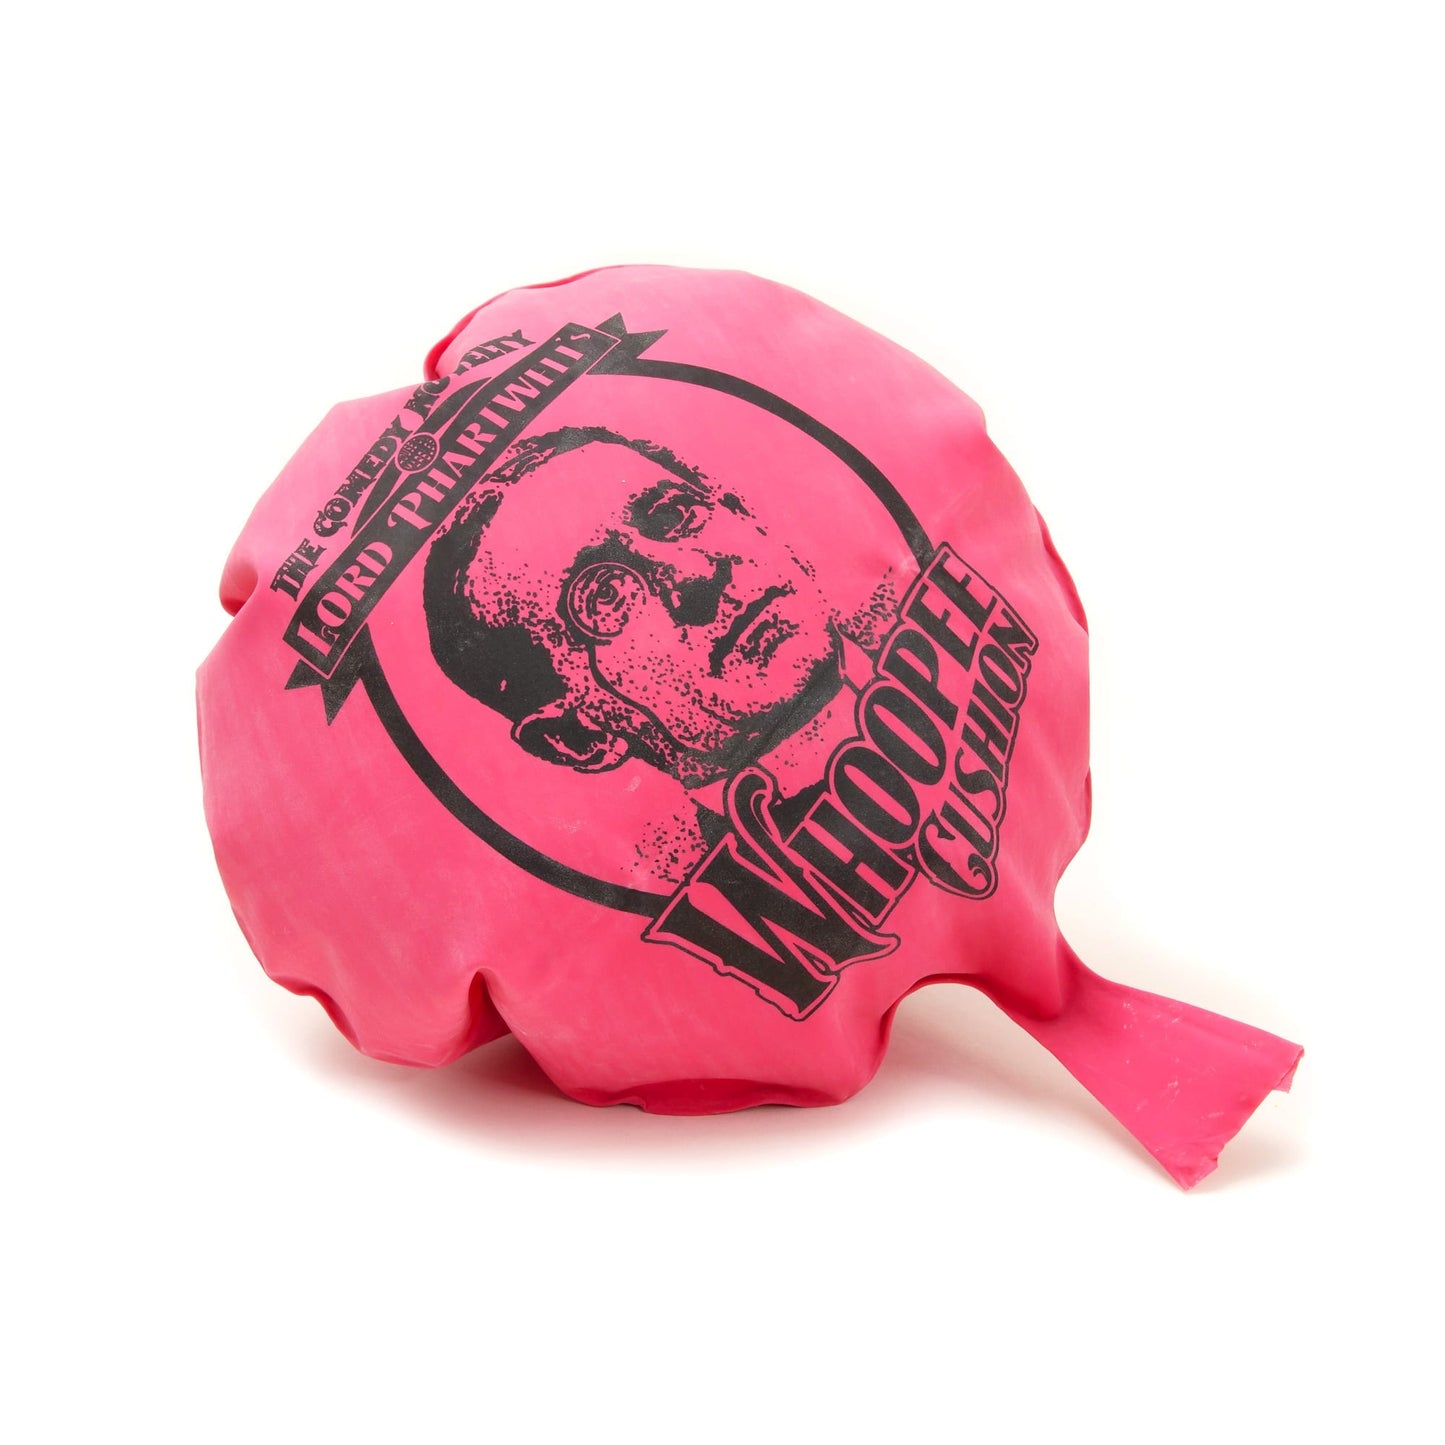 Load image into Gallery viewer, Whoopee Cushion
